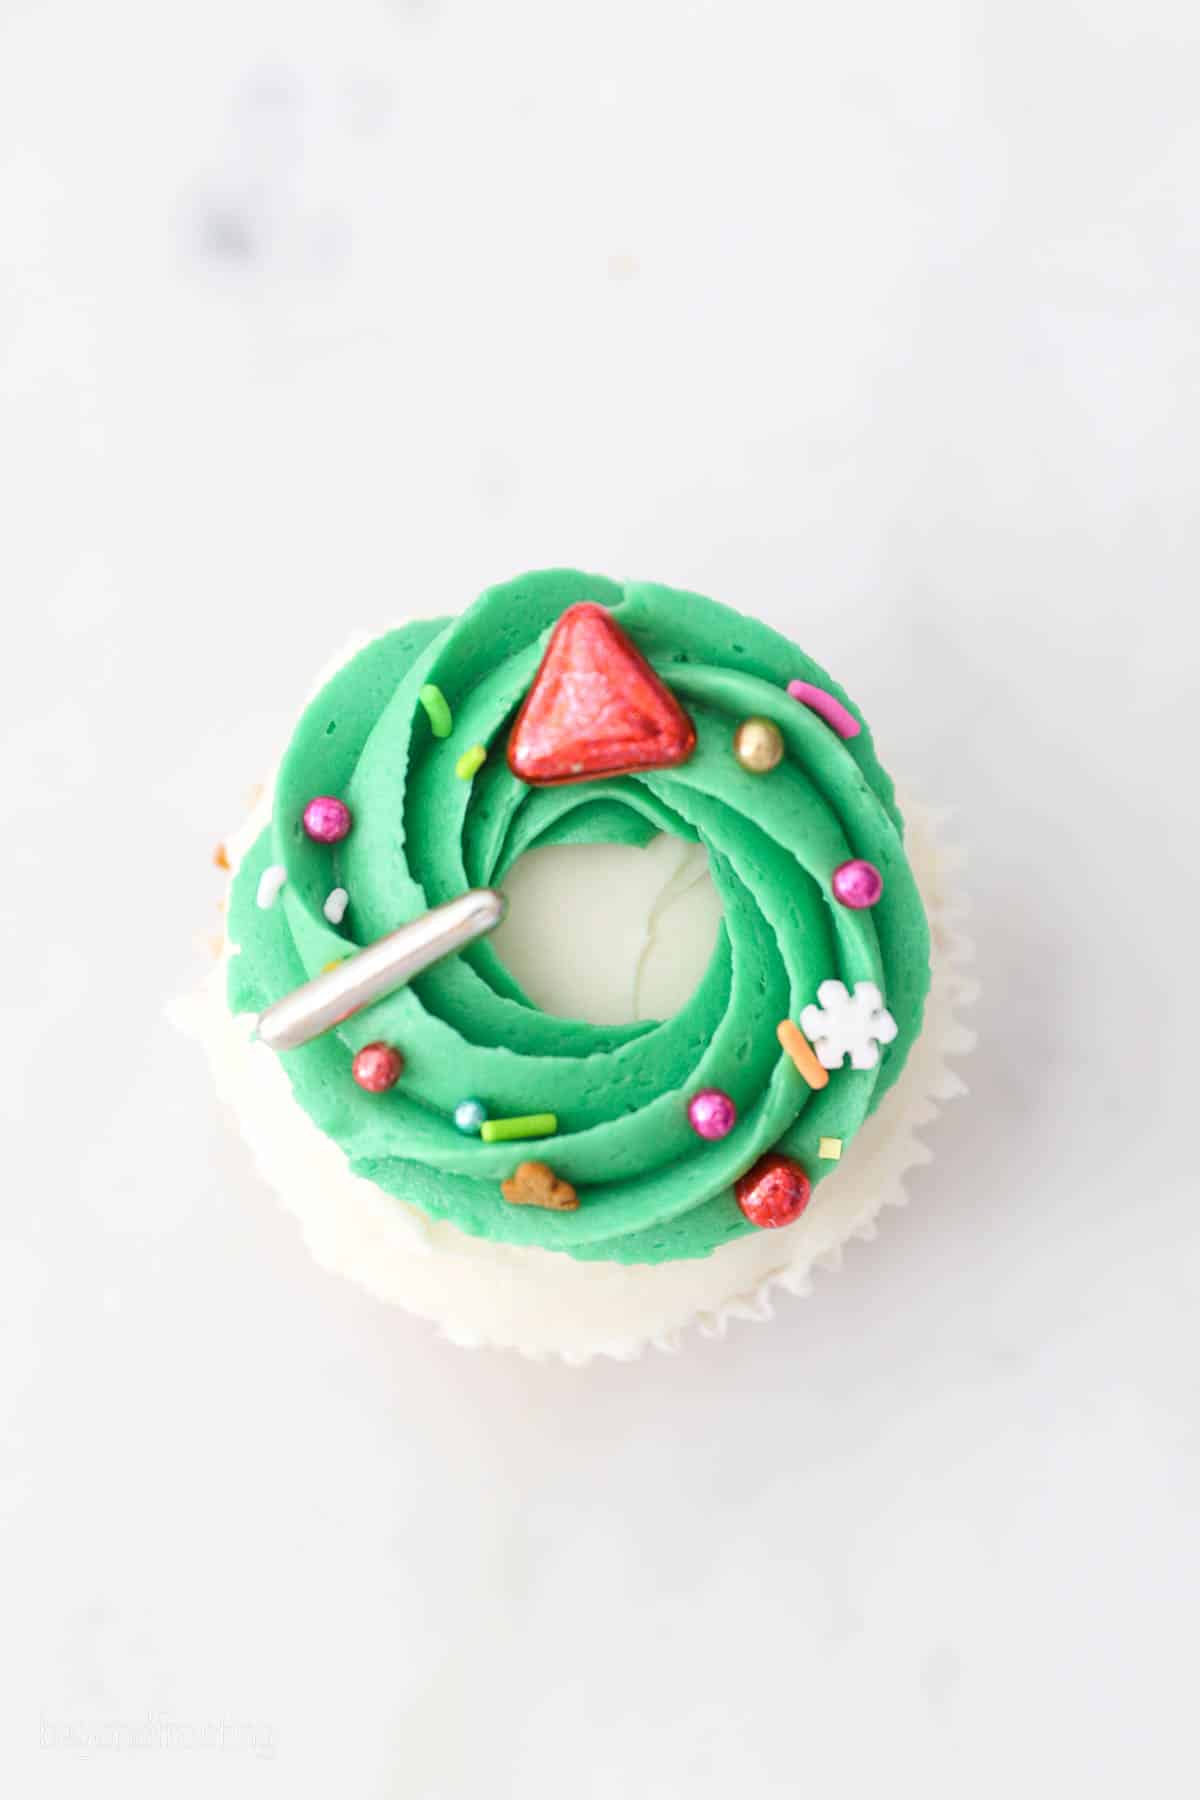 Overhead view of a Christmas cupcake decorated with a buttercream wreath and sprinkles.